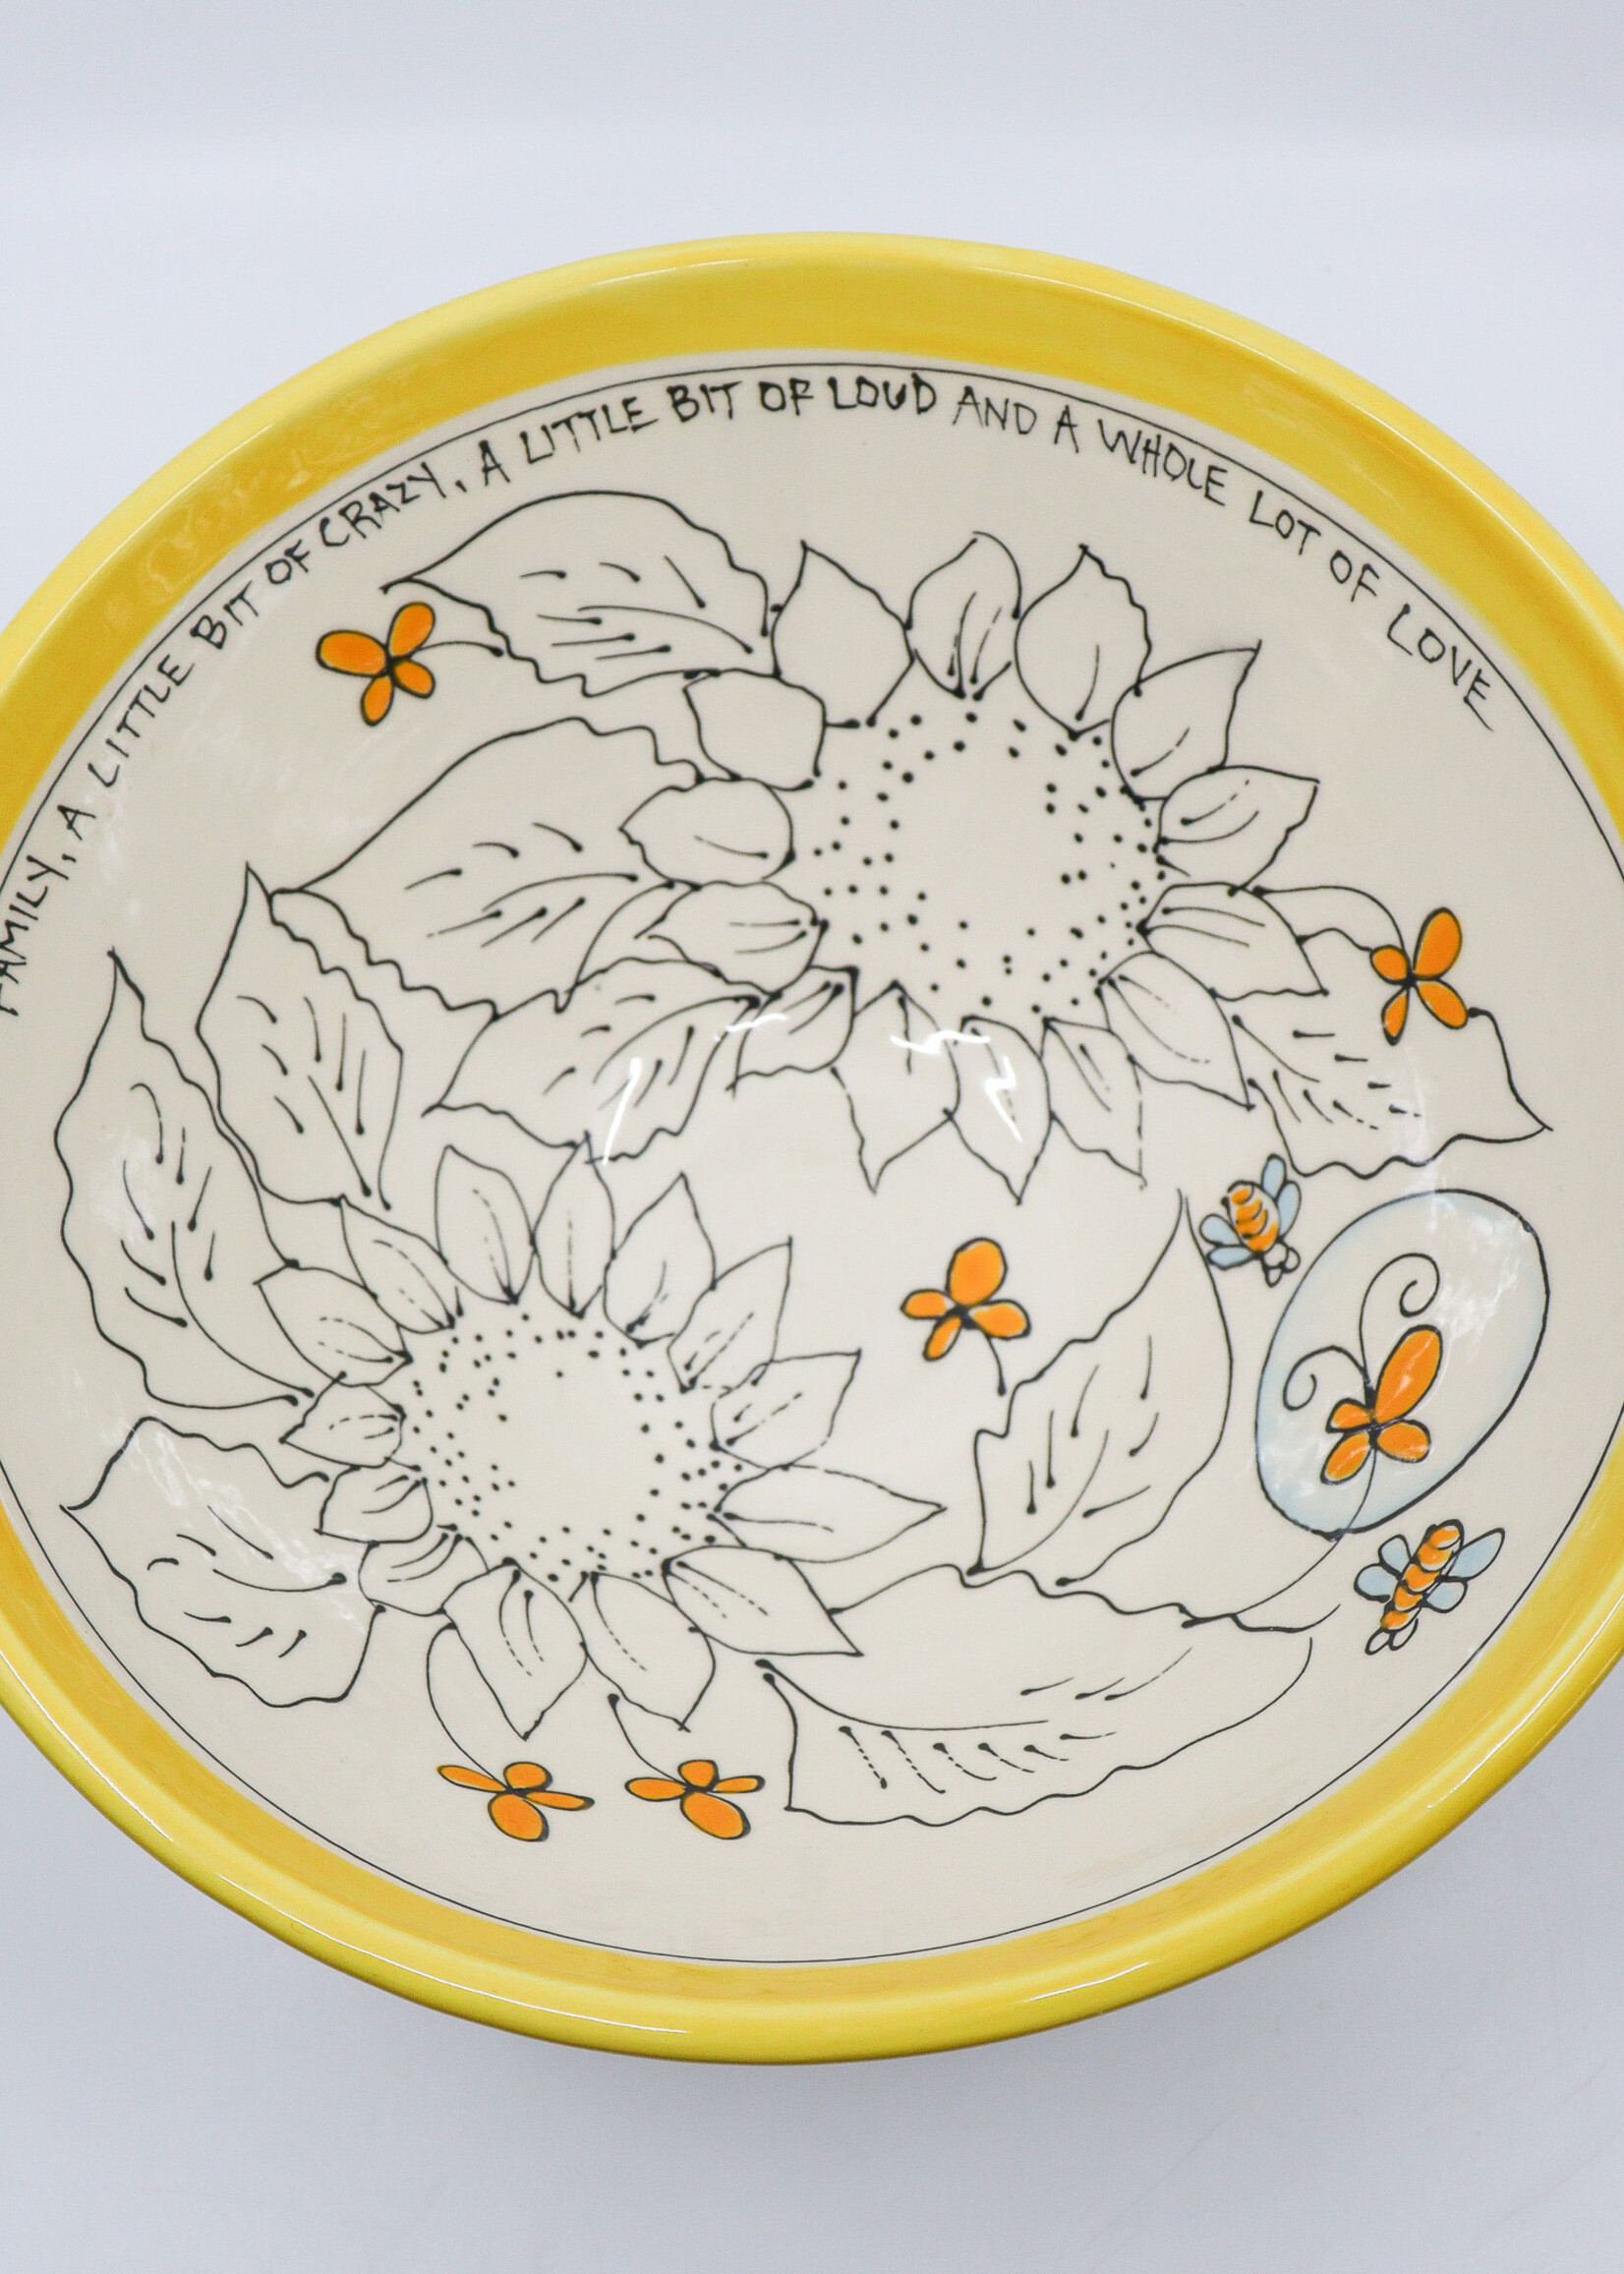 CERAMICS - 10" Bowl, Yellow Sunflowers, "Famil, A Little Bit of Crazy, A little Bit of Loud and A Whole Lot of Love"